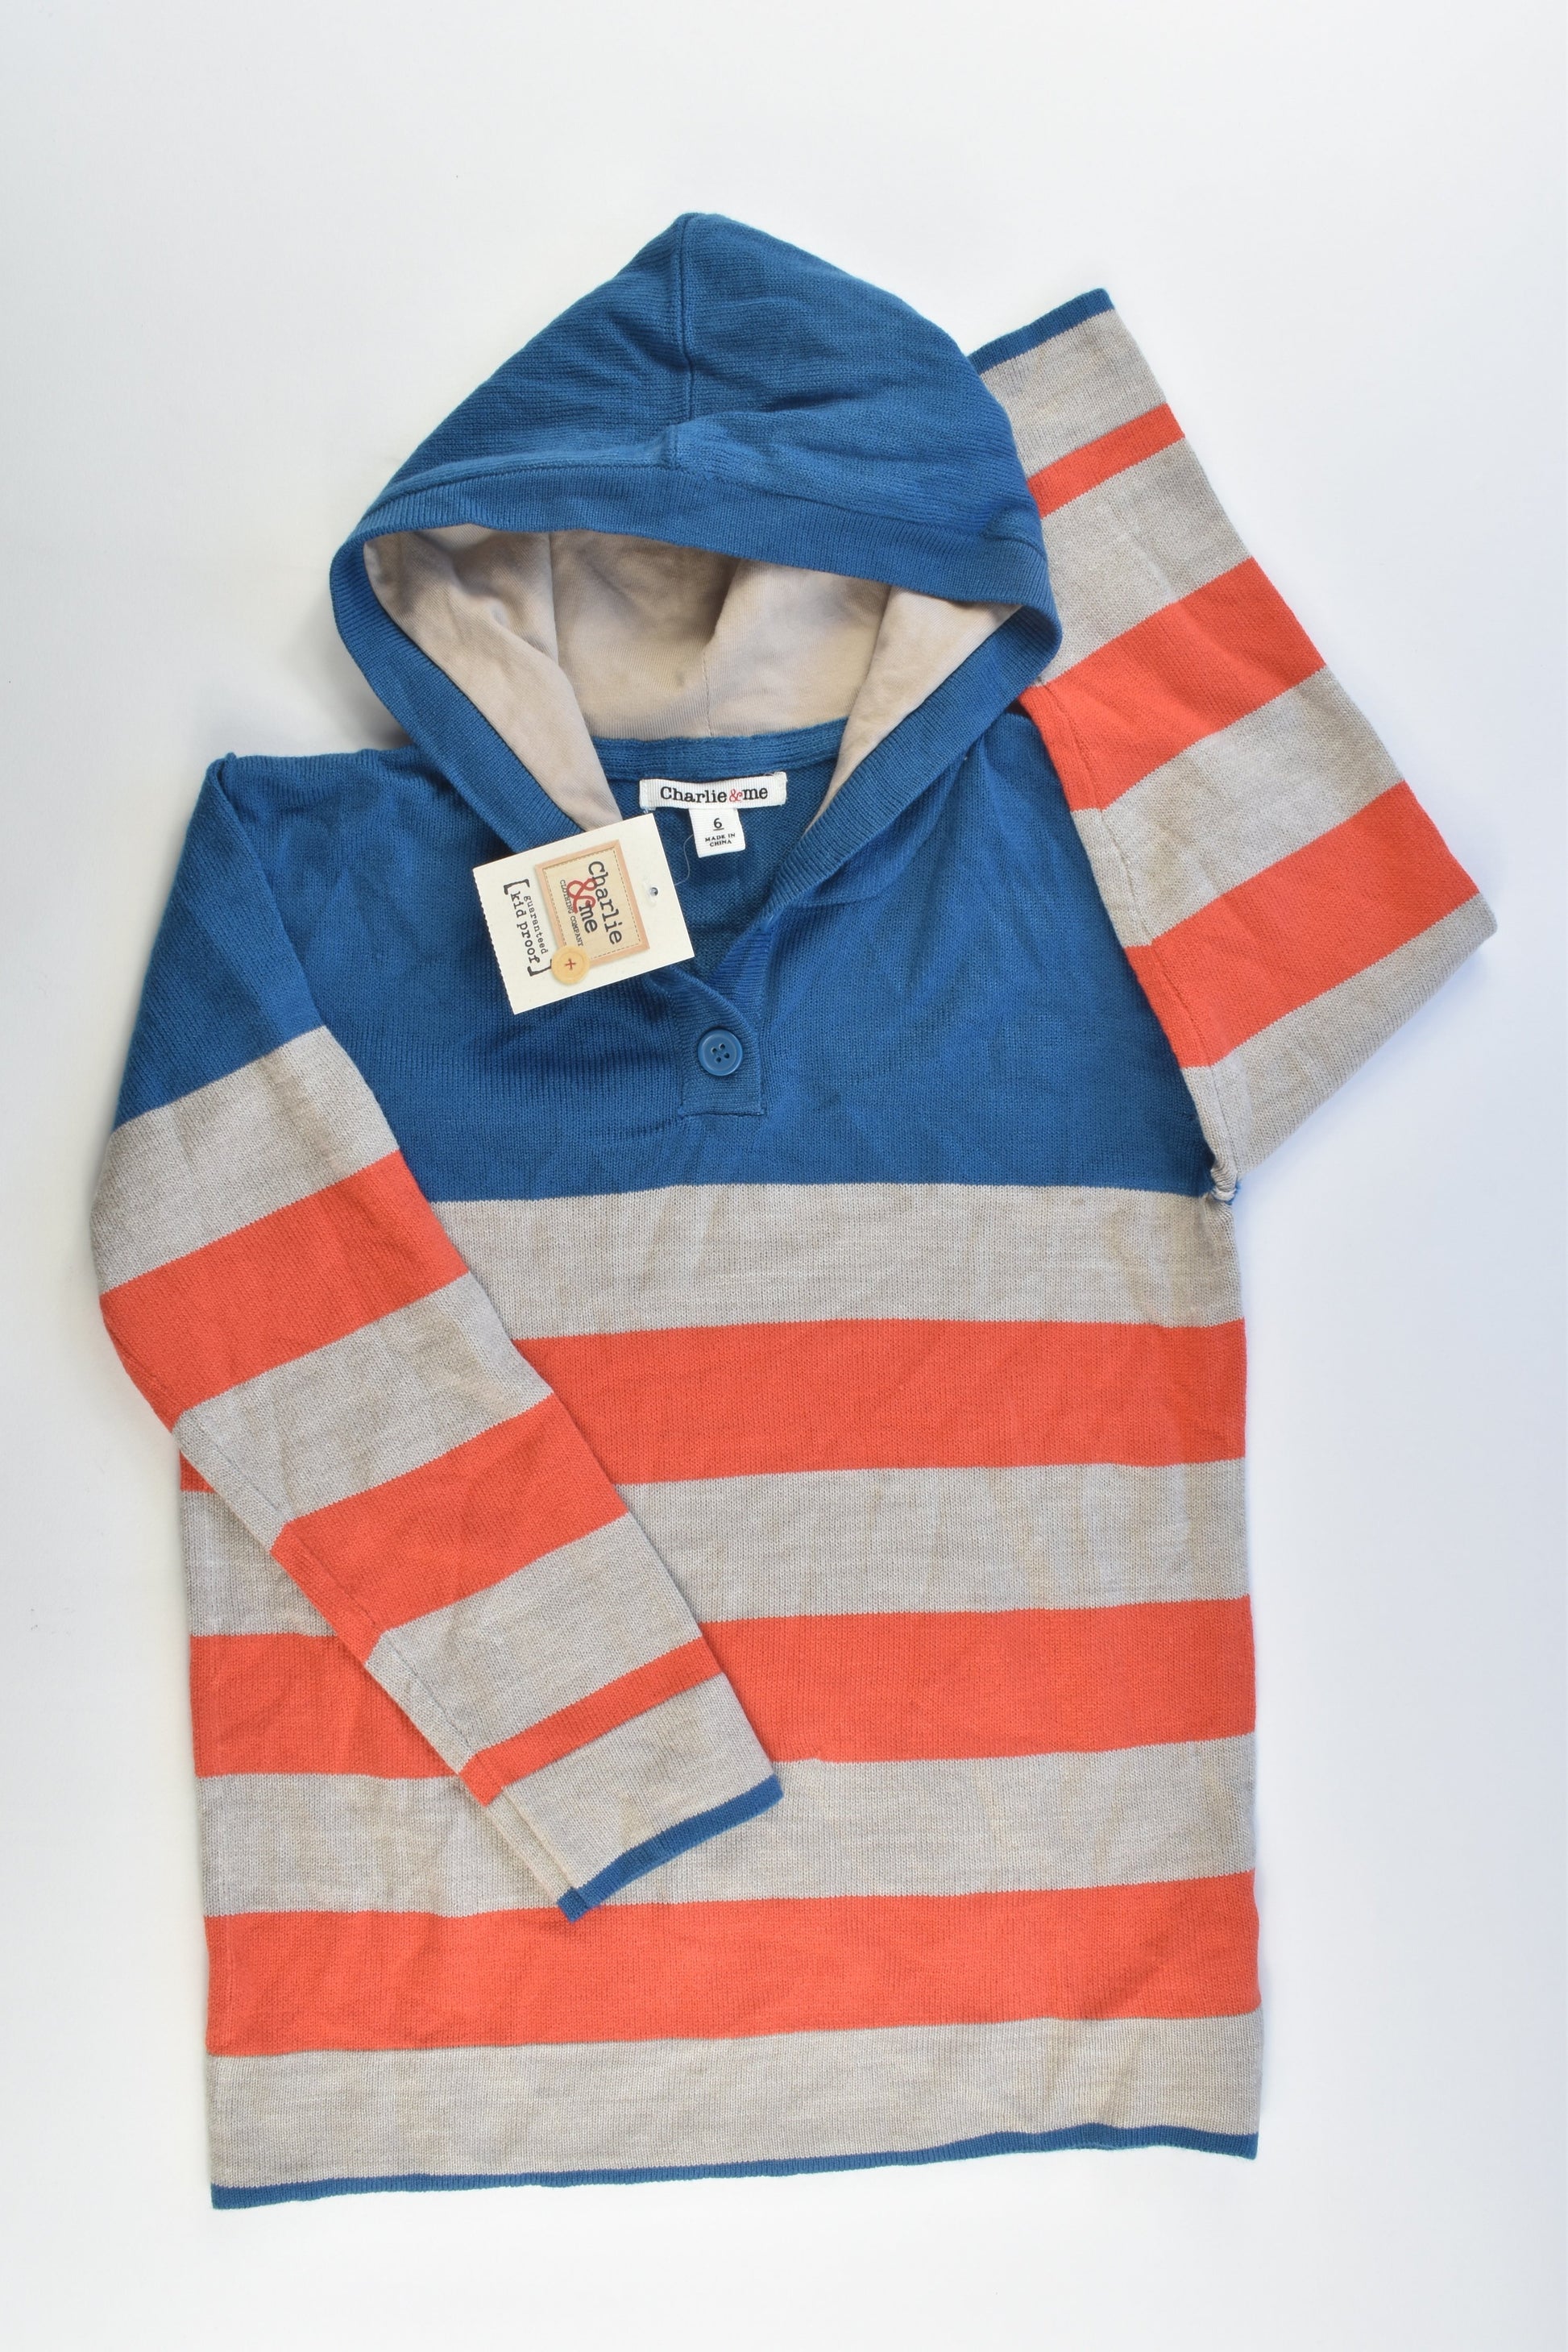 NEW Charlie & Me Size 6 Knitted Striped Hooded Jumper